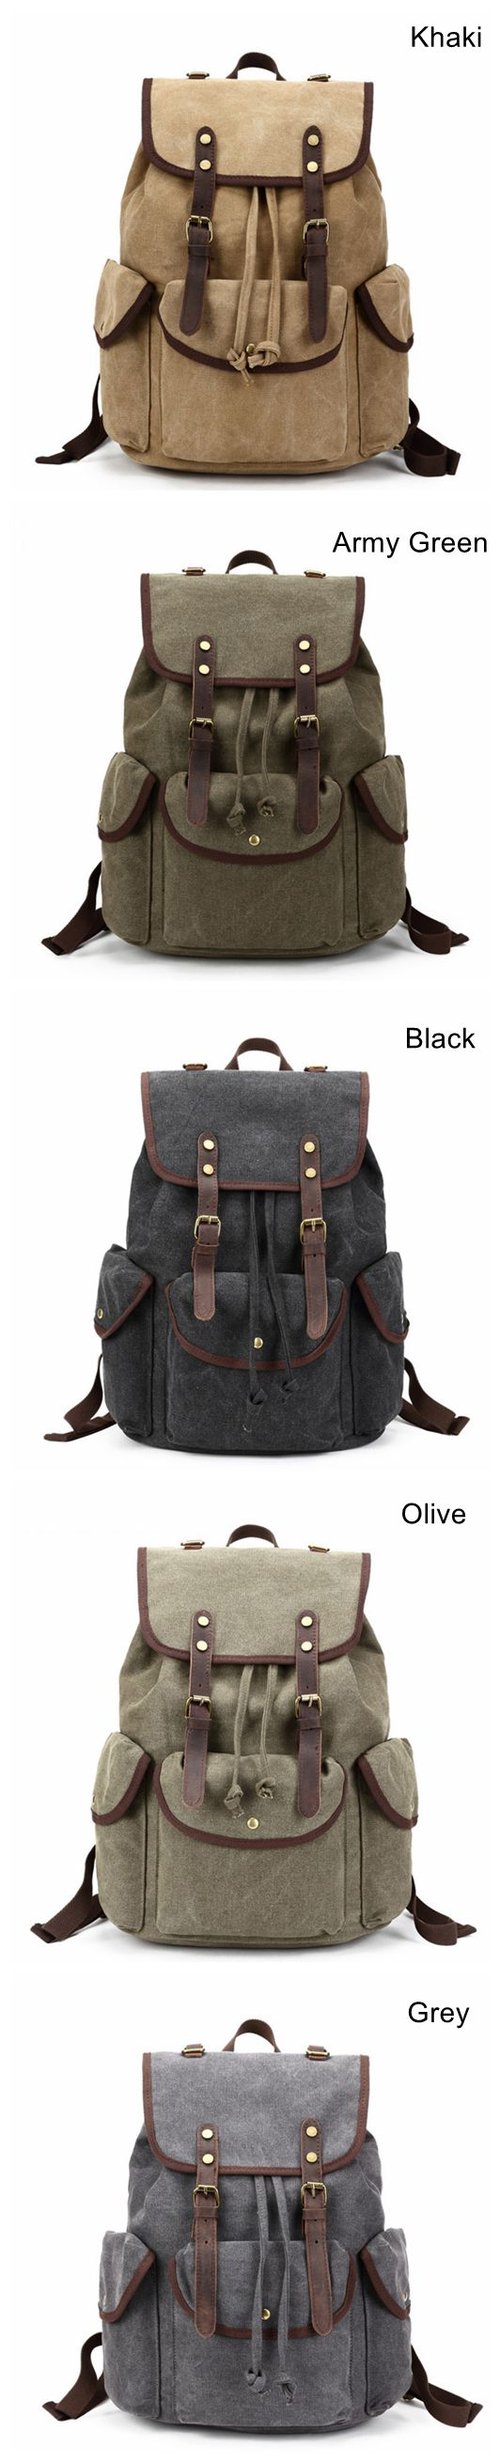 Image of Canvas with Leather Trim School Backpack, Rucksack, Travel Backpack FB06